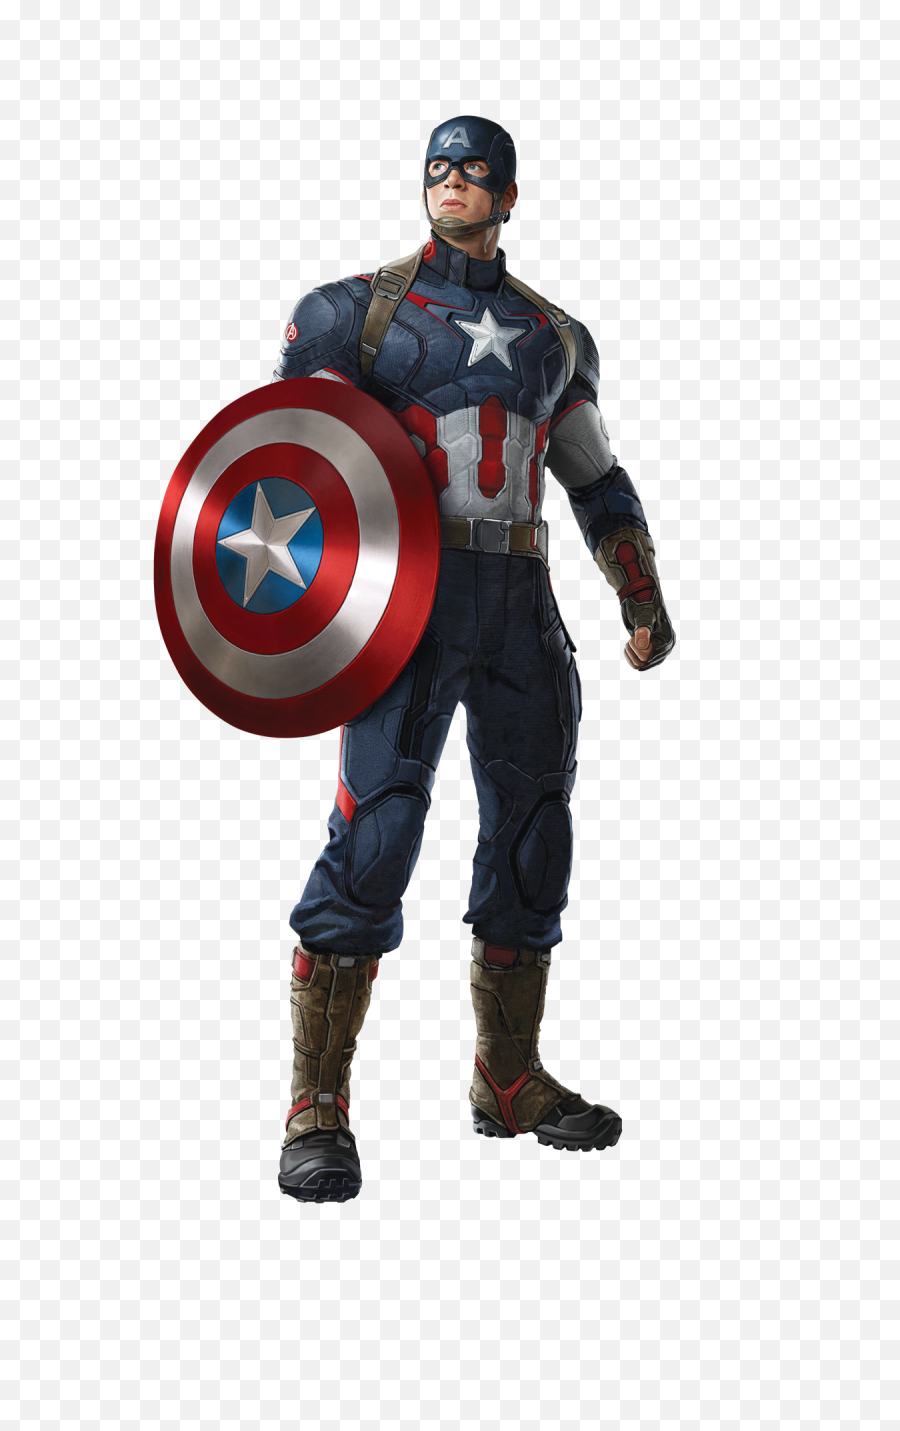 Download Hd Free Png Captain America - Capitán América Avengers 2,Capitan America Png